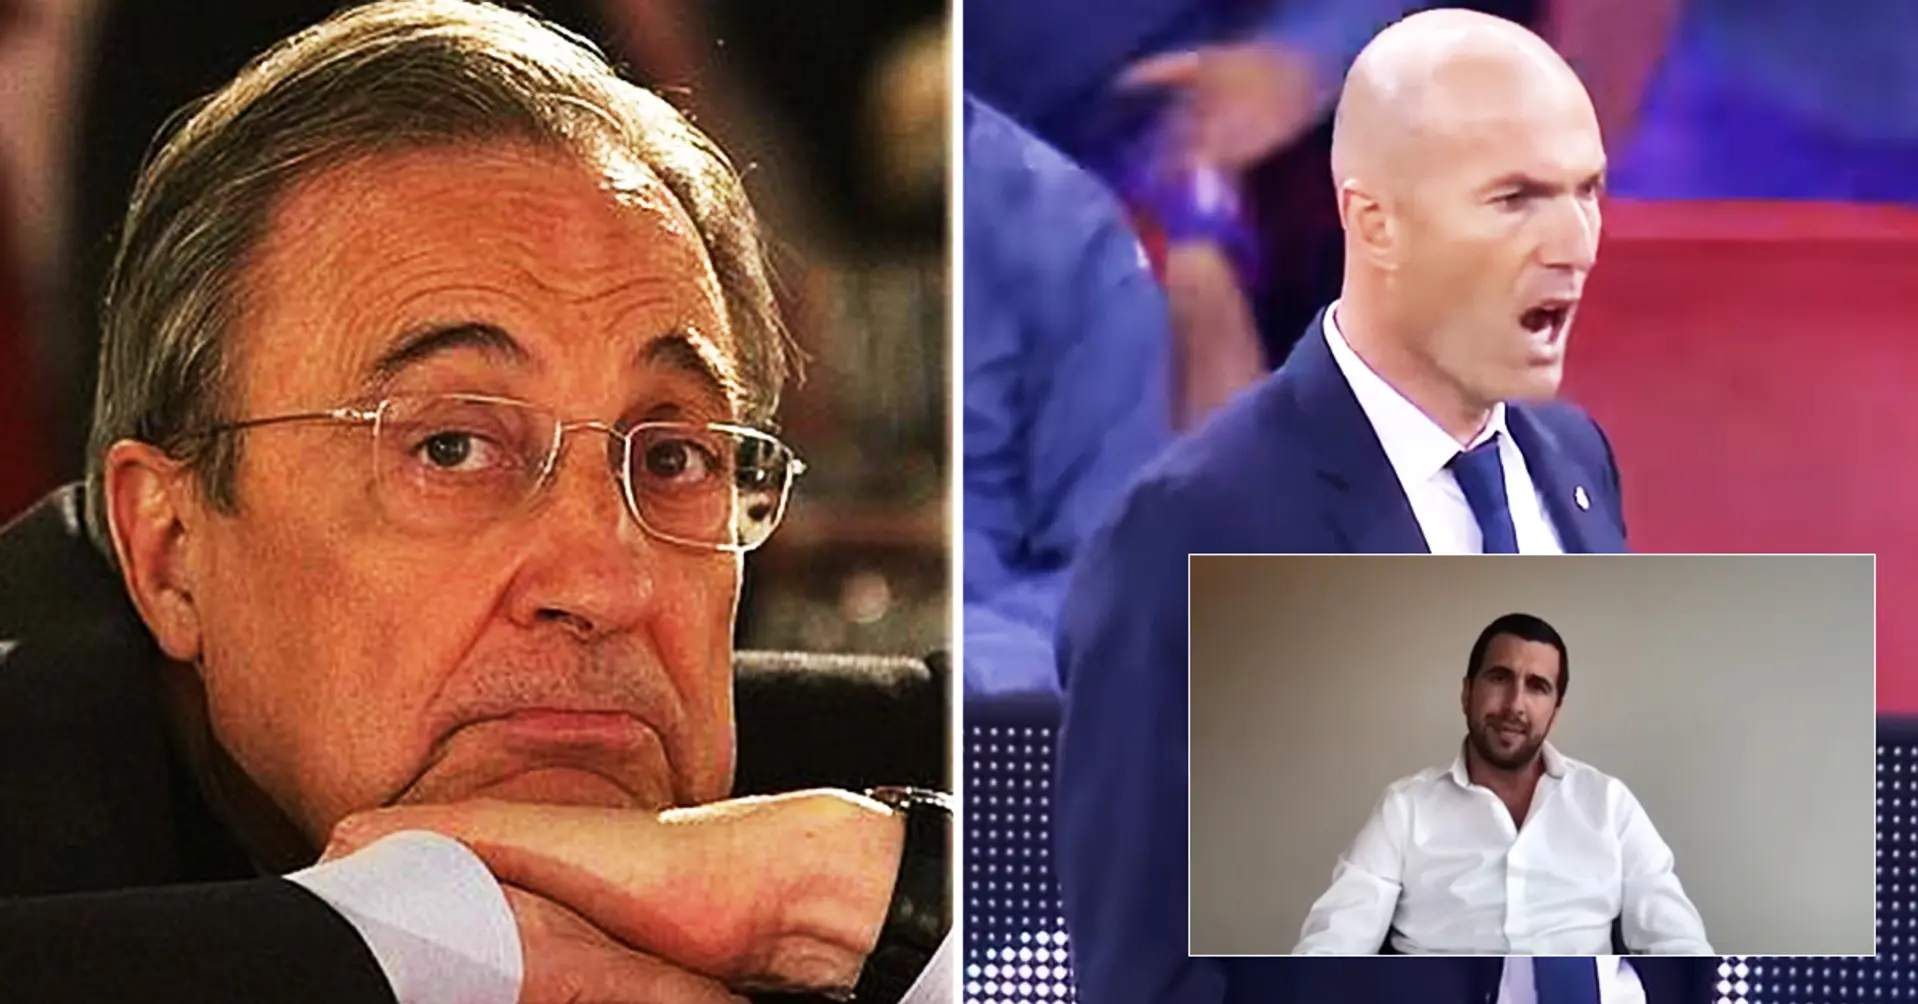 'Zidane will not be our manager'. Real Madrid presidential candidate announces his dream coach and plans for future